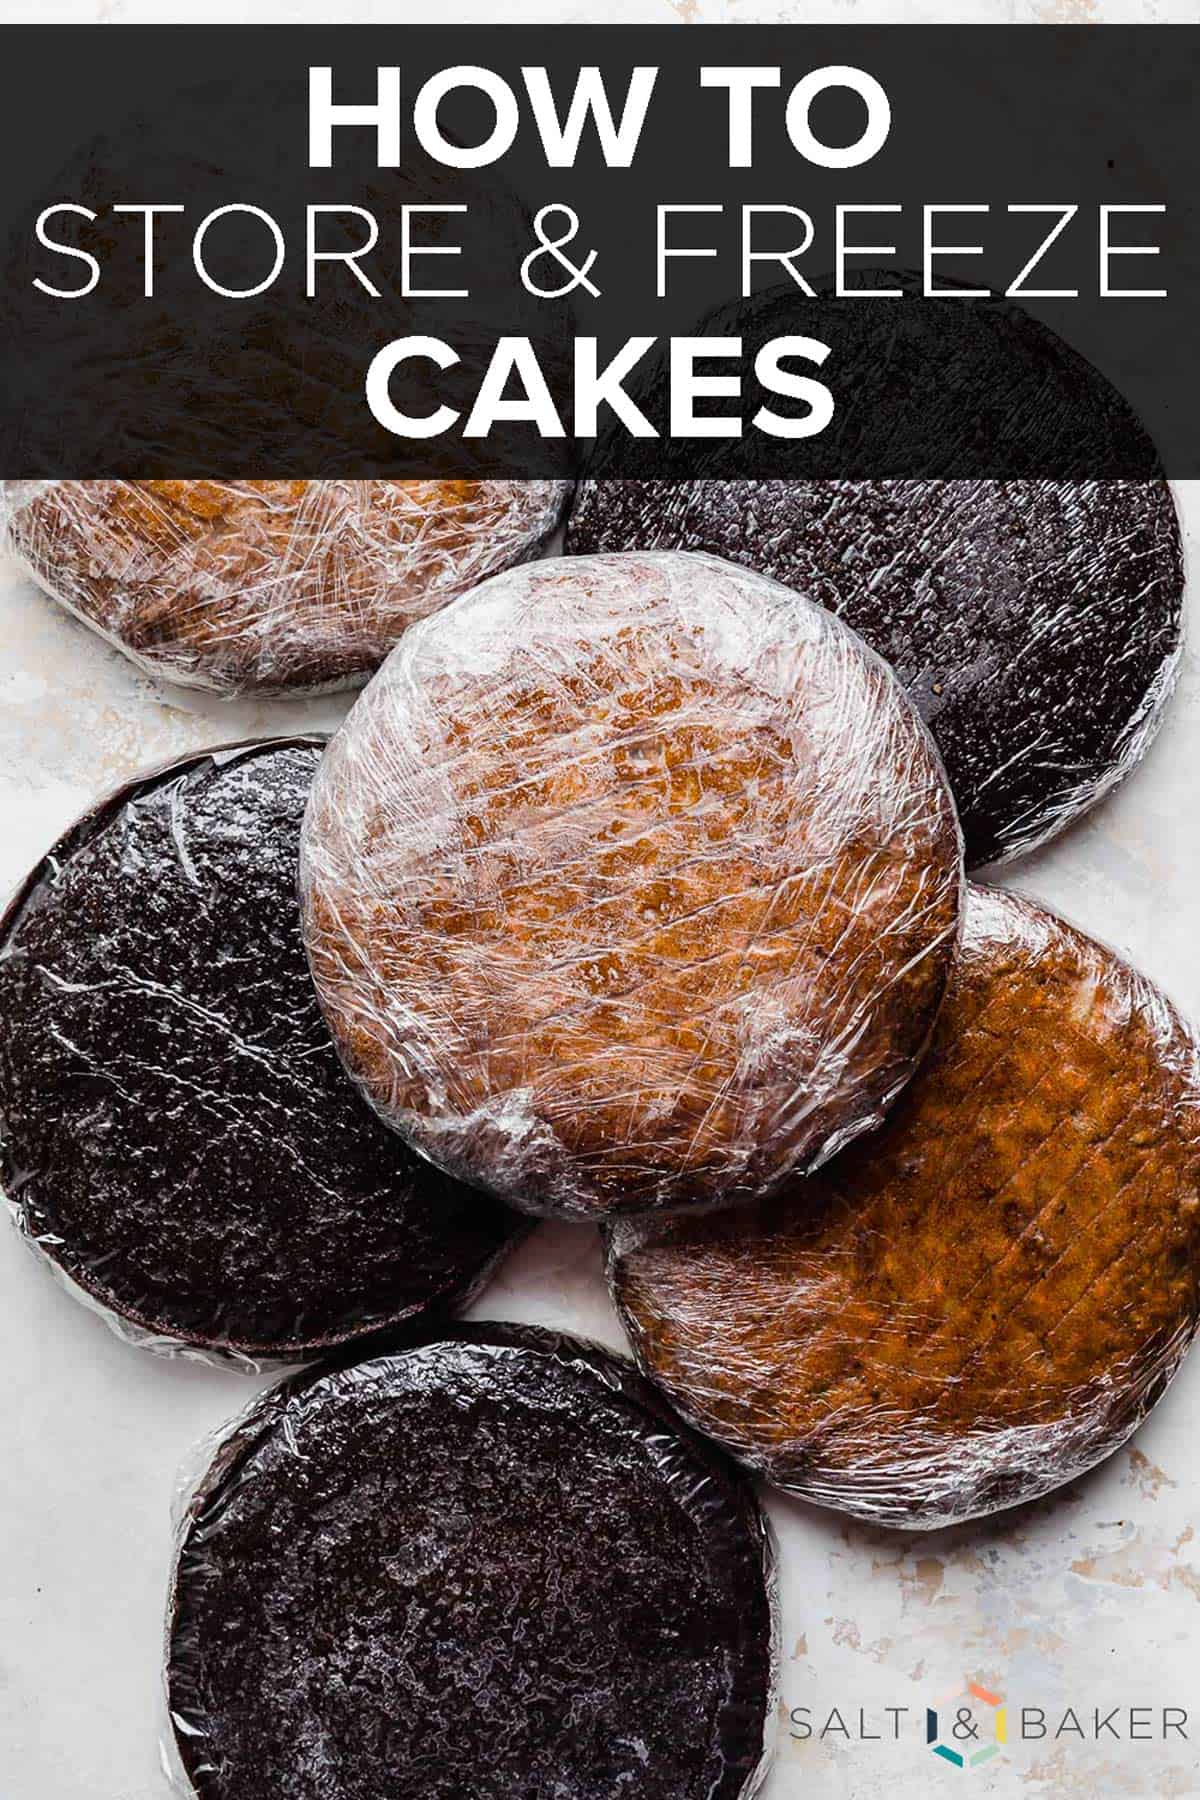 Light brown and dark chocolate baked cake rounds individually wrapped in plastic wrap with a banner of text reading "How to Store and Freeze Cakes."